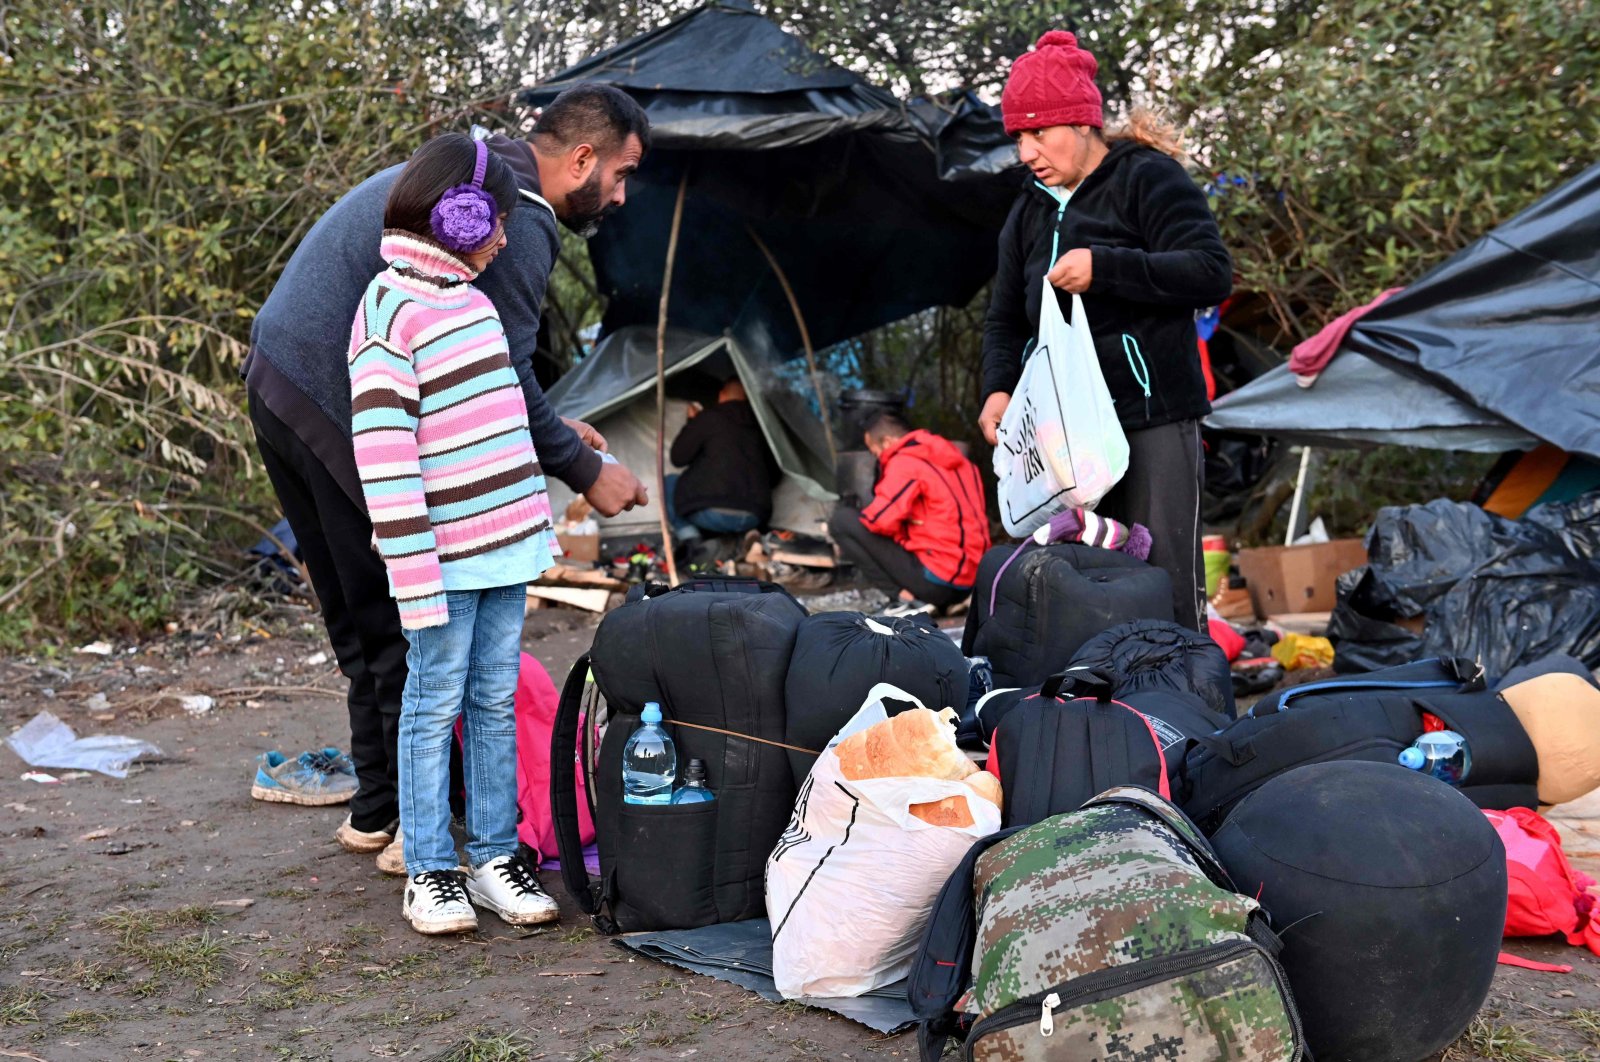 Members of an Afghan family pack their belongings as they prepare to cross the Croatian border near their illegal improvised camp, outside the northern Bosnian border town of Velika Kladusa, Oct. 15, 2021. (AFP Photo)